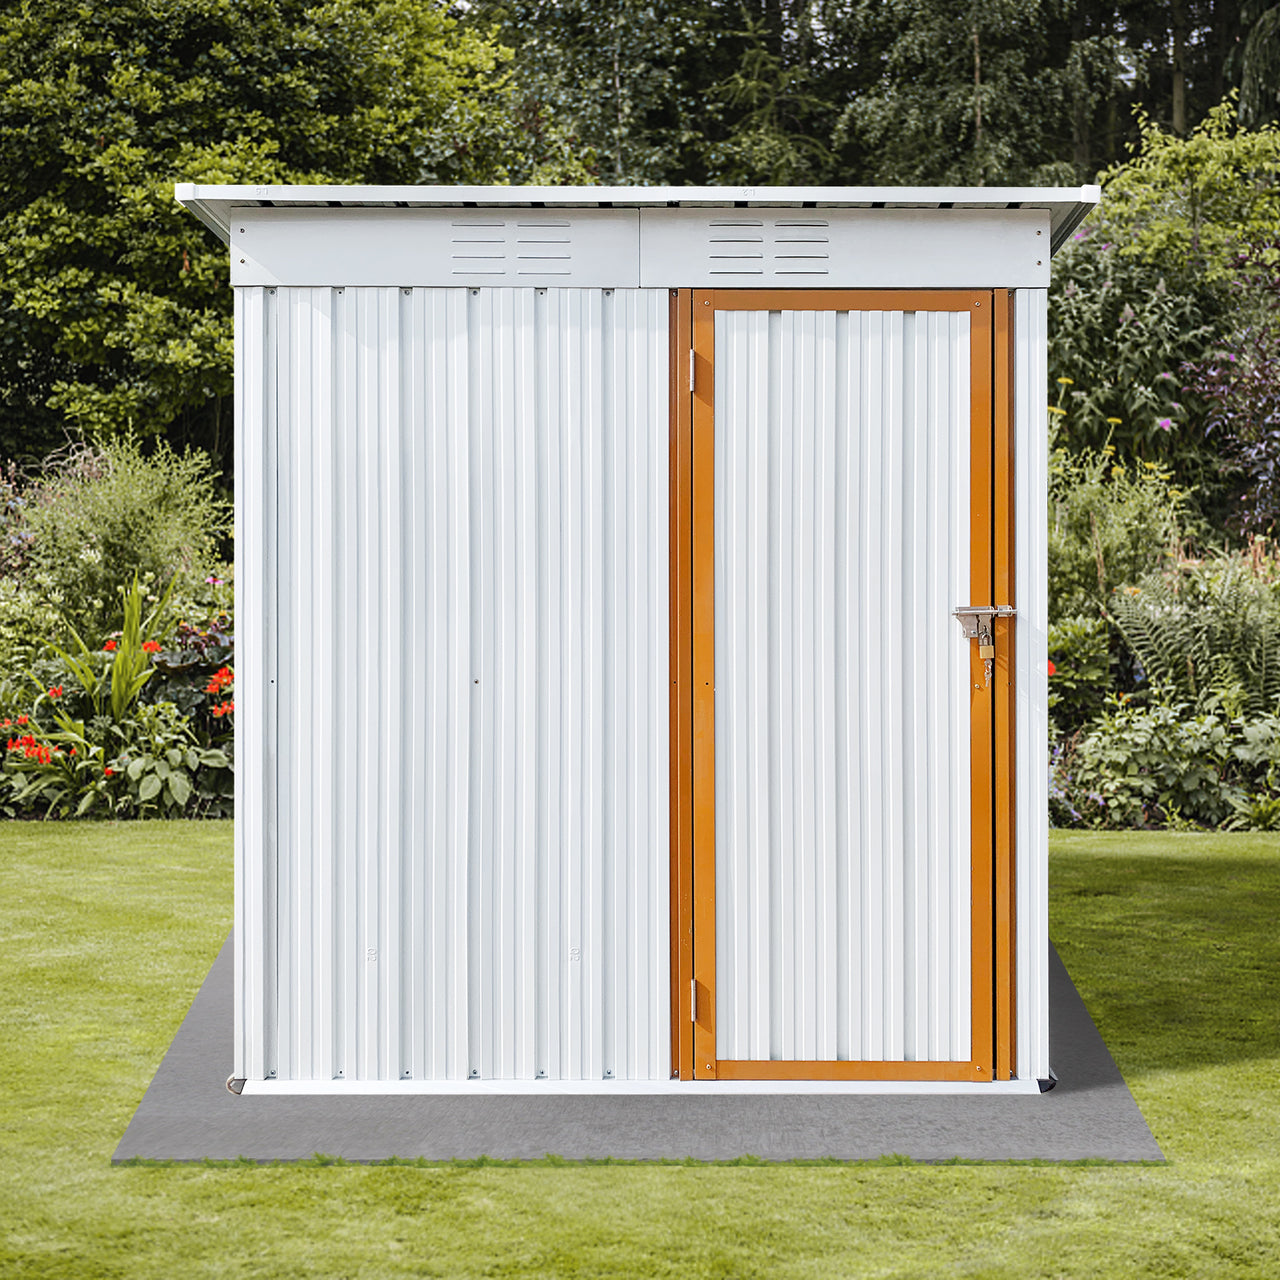 Metal garden sheds 5ftx4ft outdoor storage sheds white+yellow